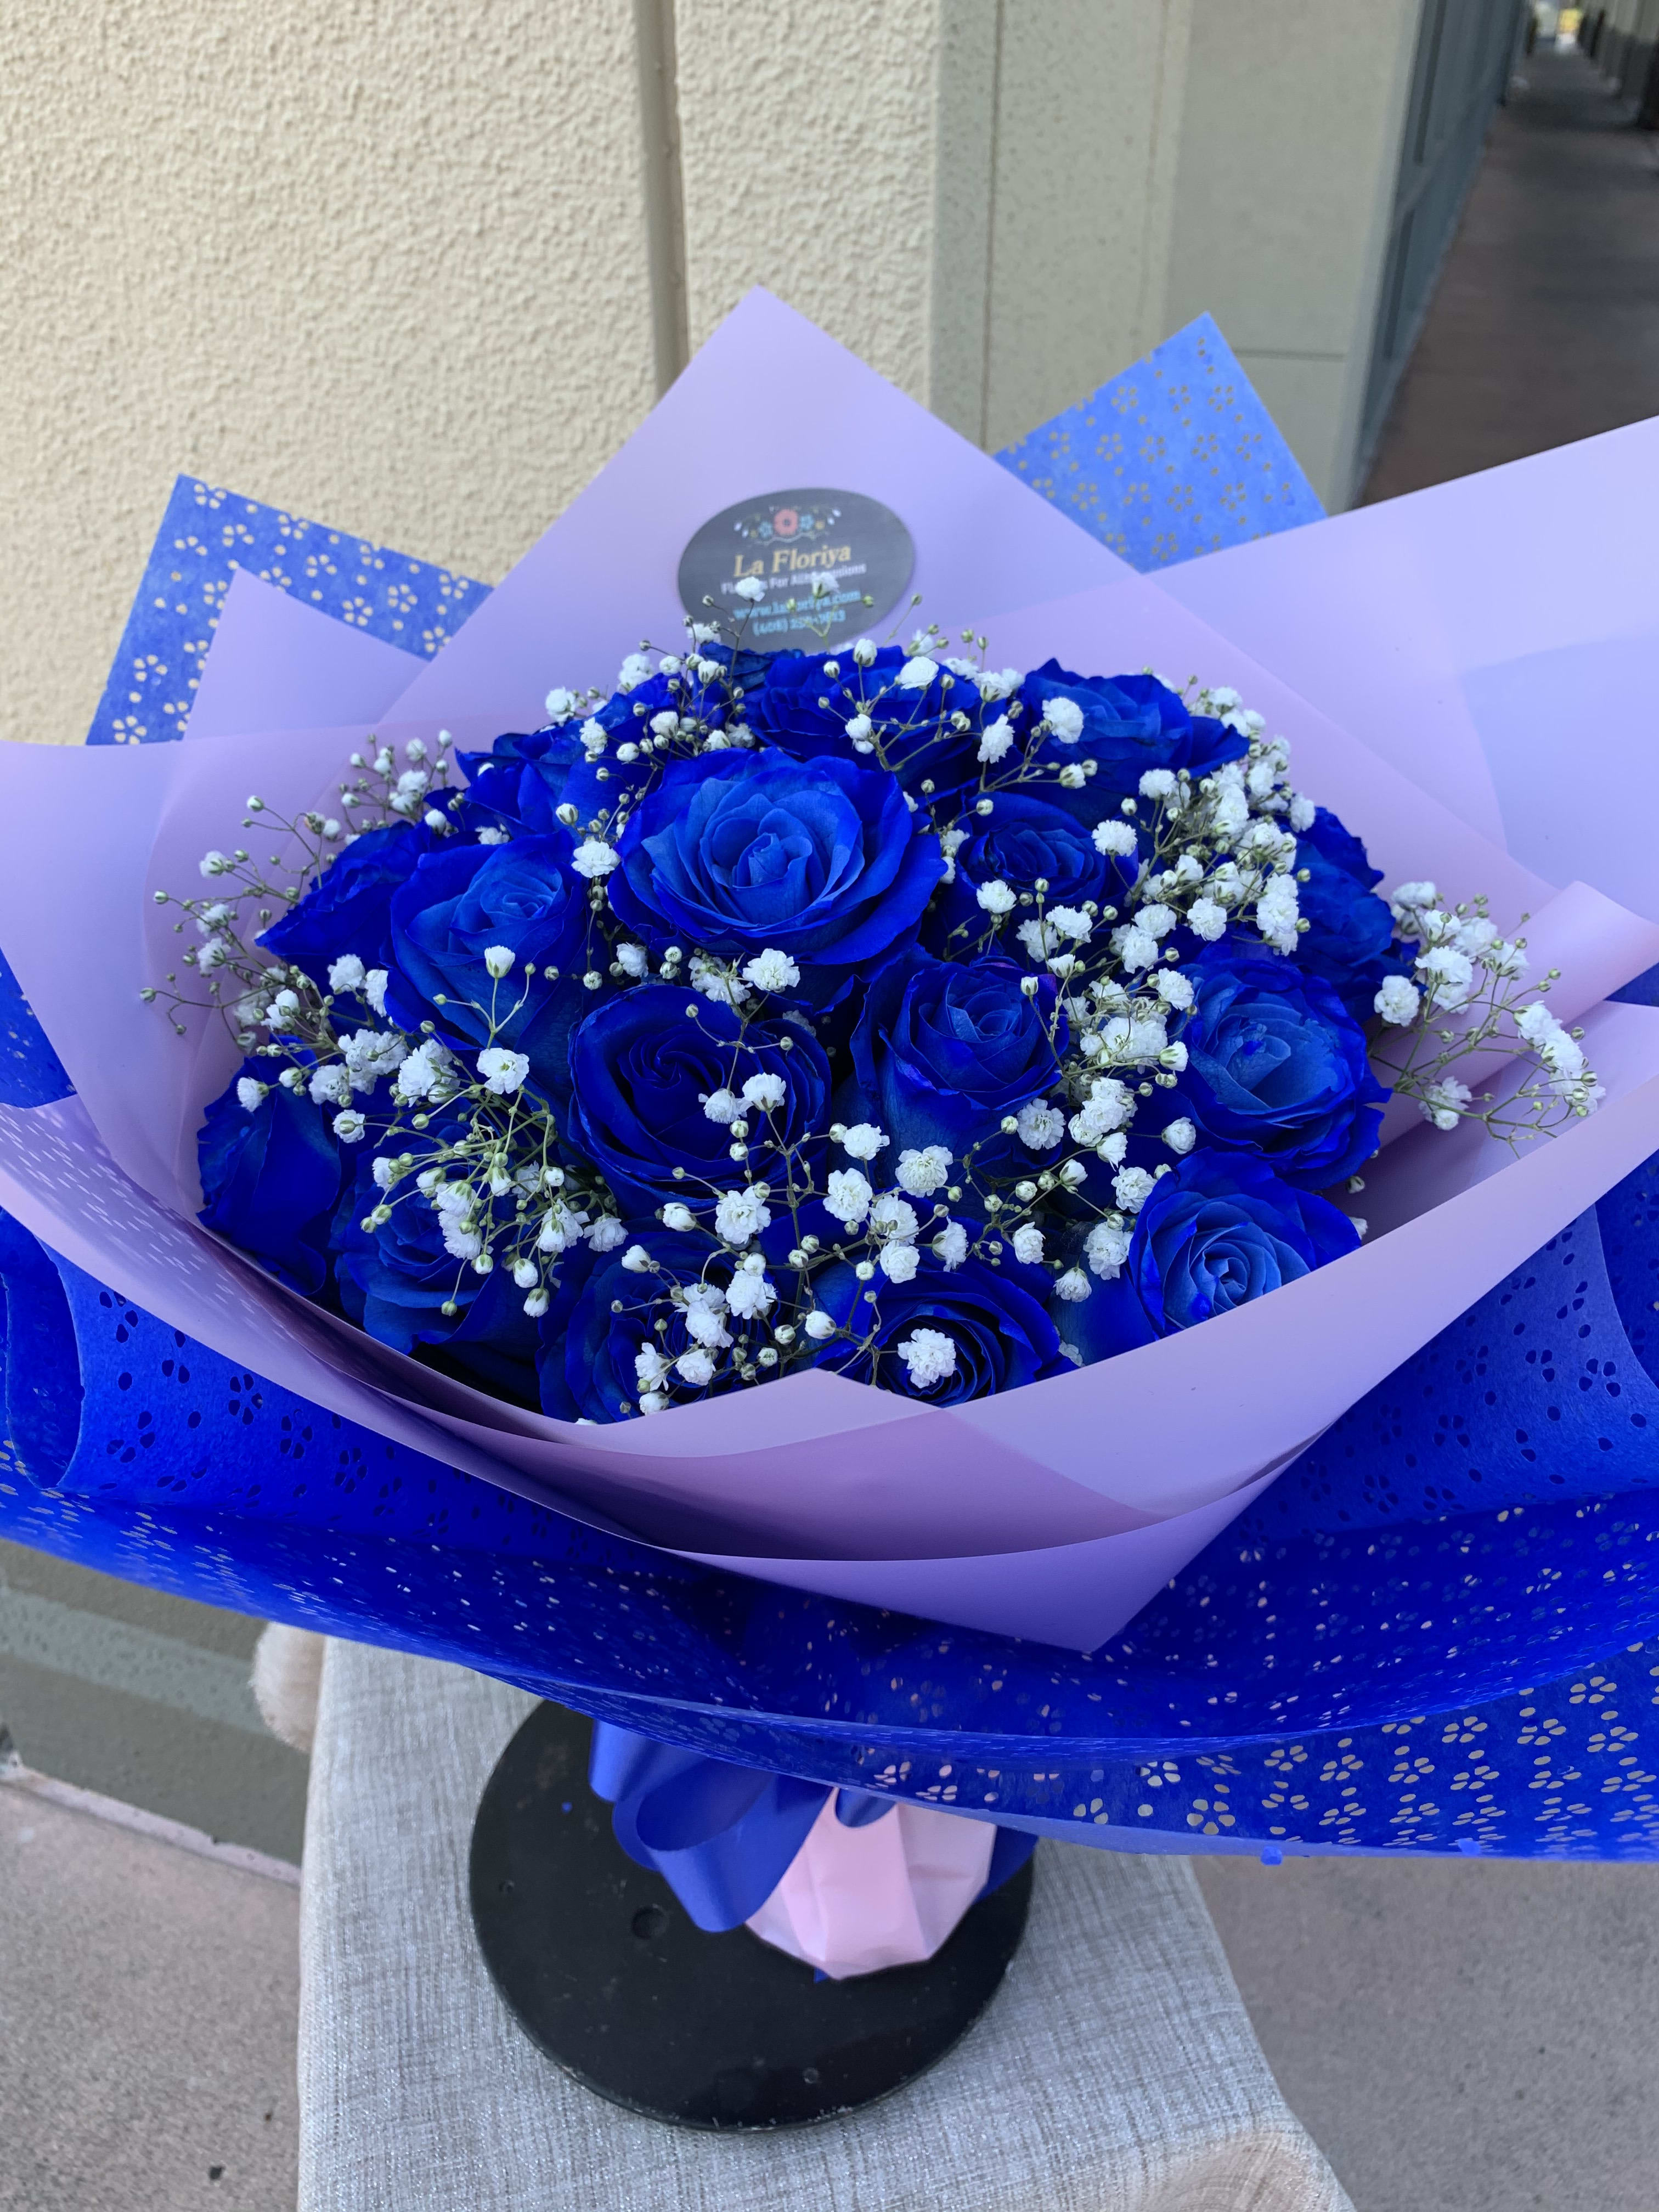 2 Dz. Blue Roses Wrapped Bouquet (PRE-ORDER ONLY) in San Jose, CA